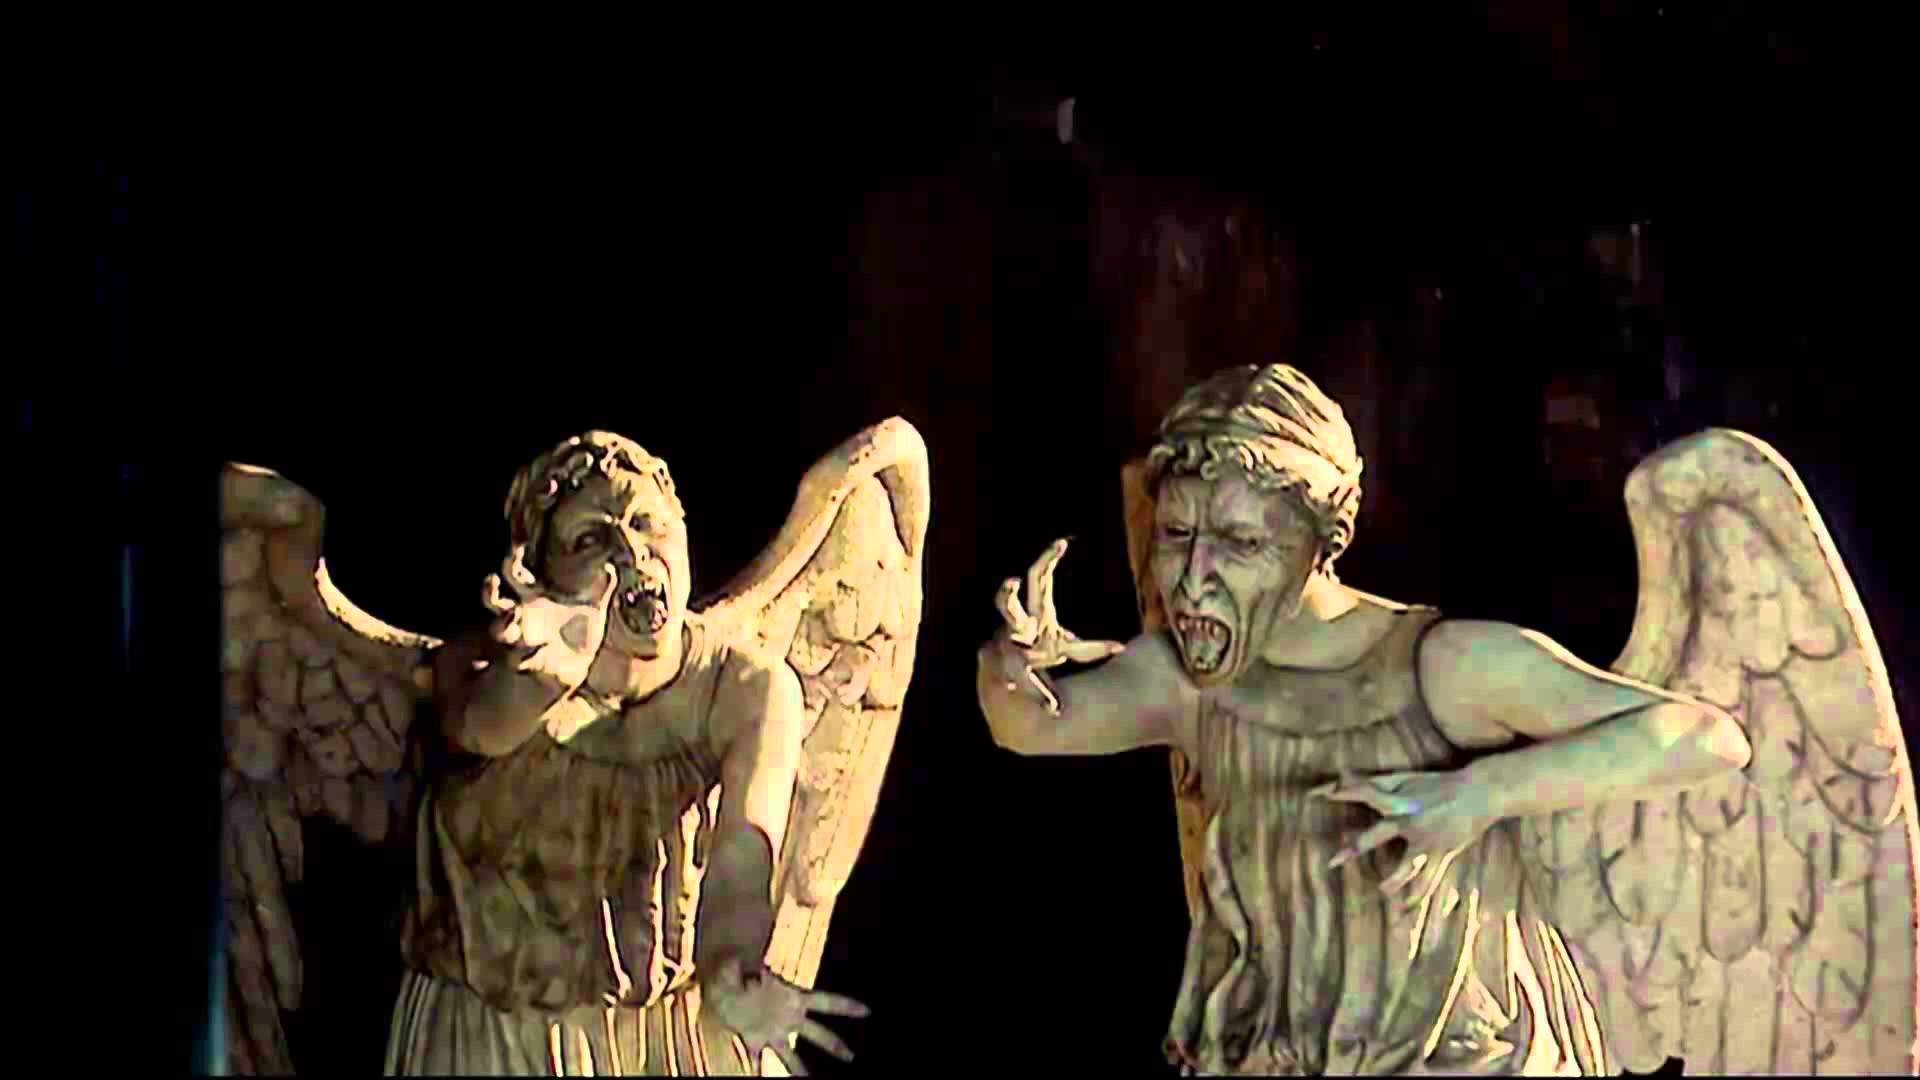 1920x1080 Doctor Who Weeping Angels Screensaver - YouTube